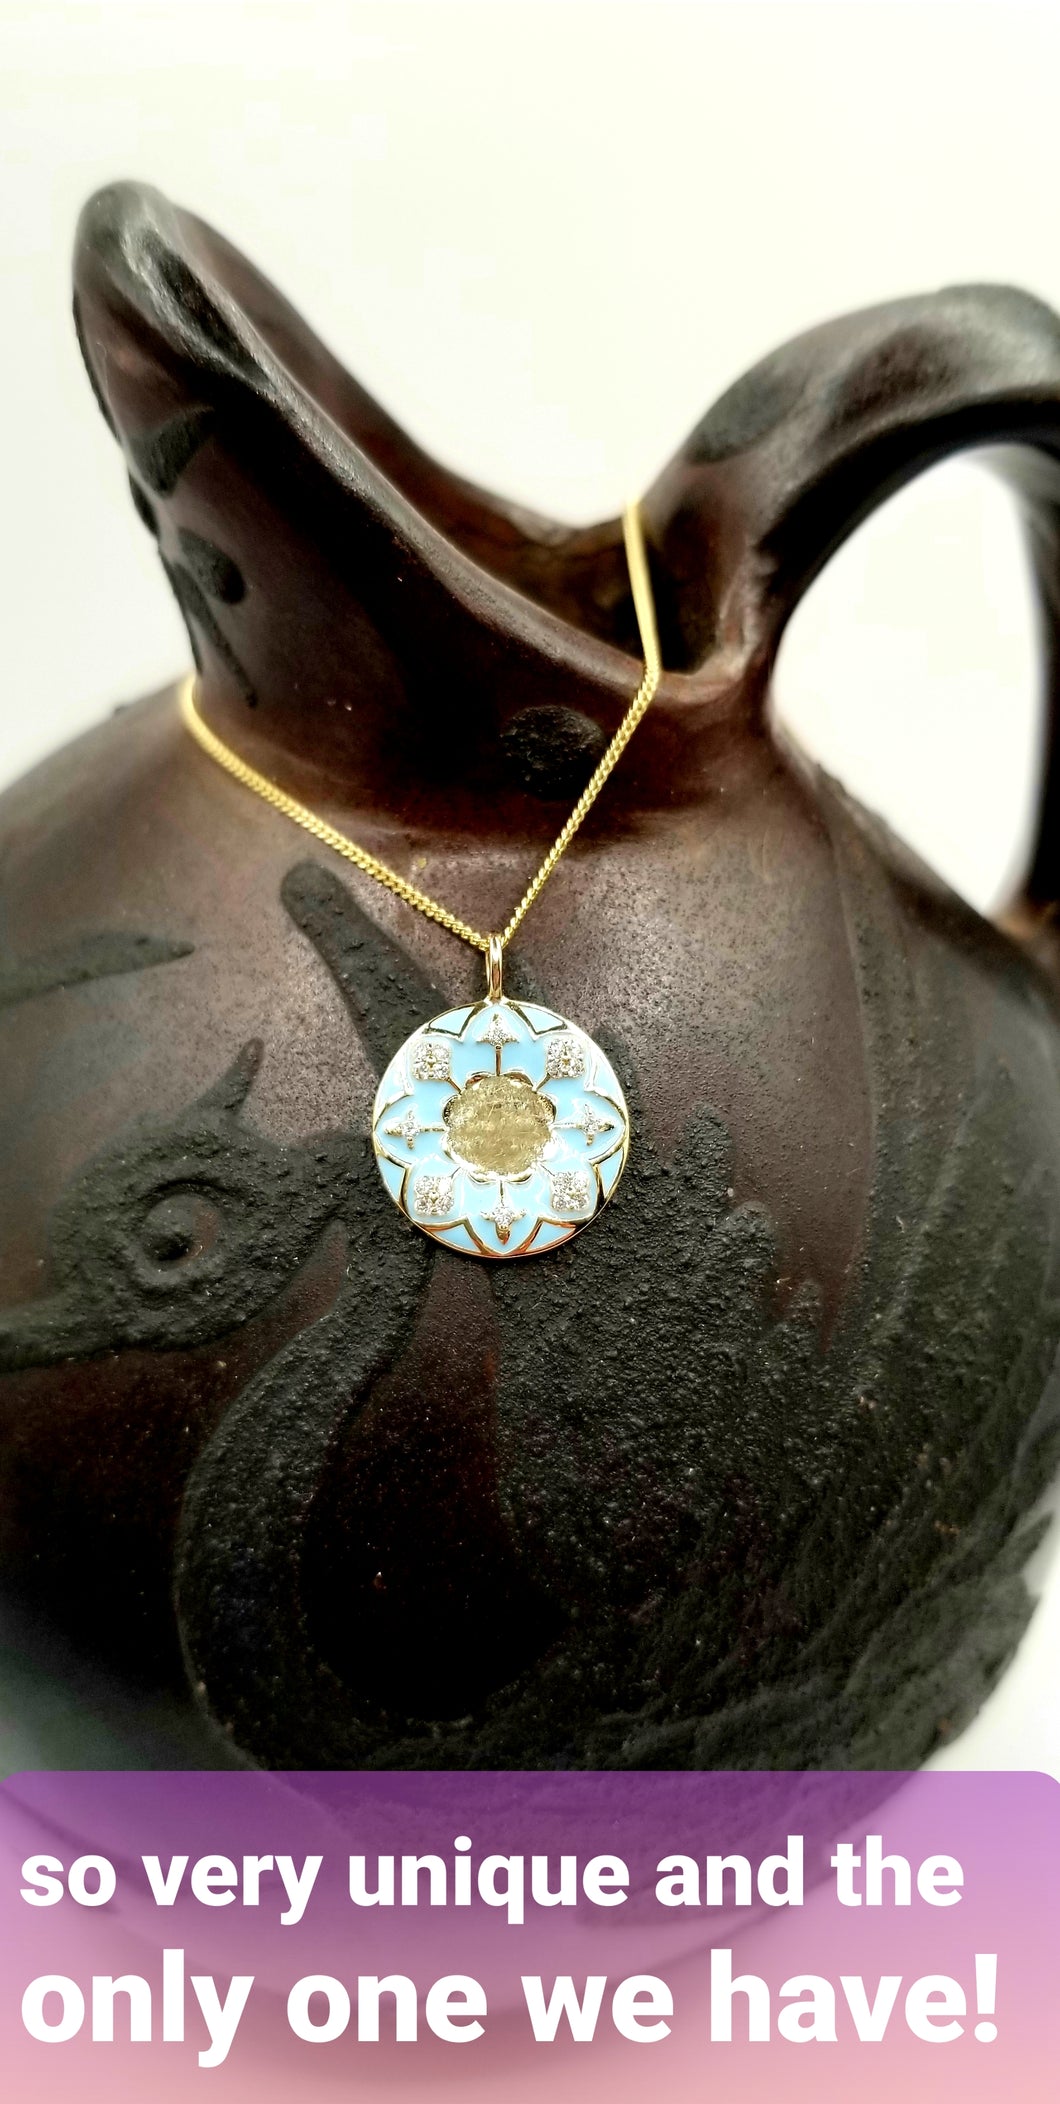 Stunning Gold & Enamel Pendant Accented with Diamonds